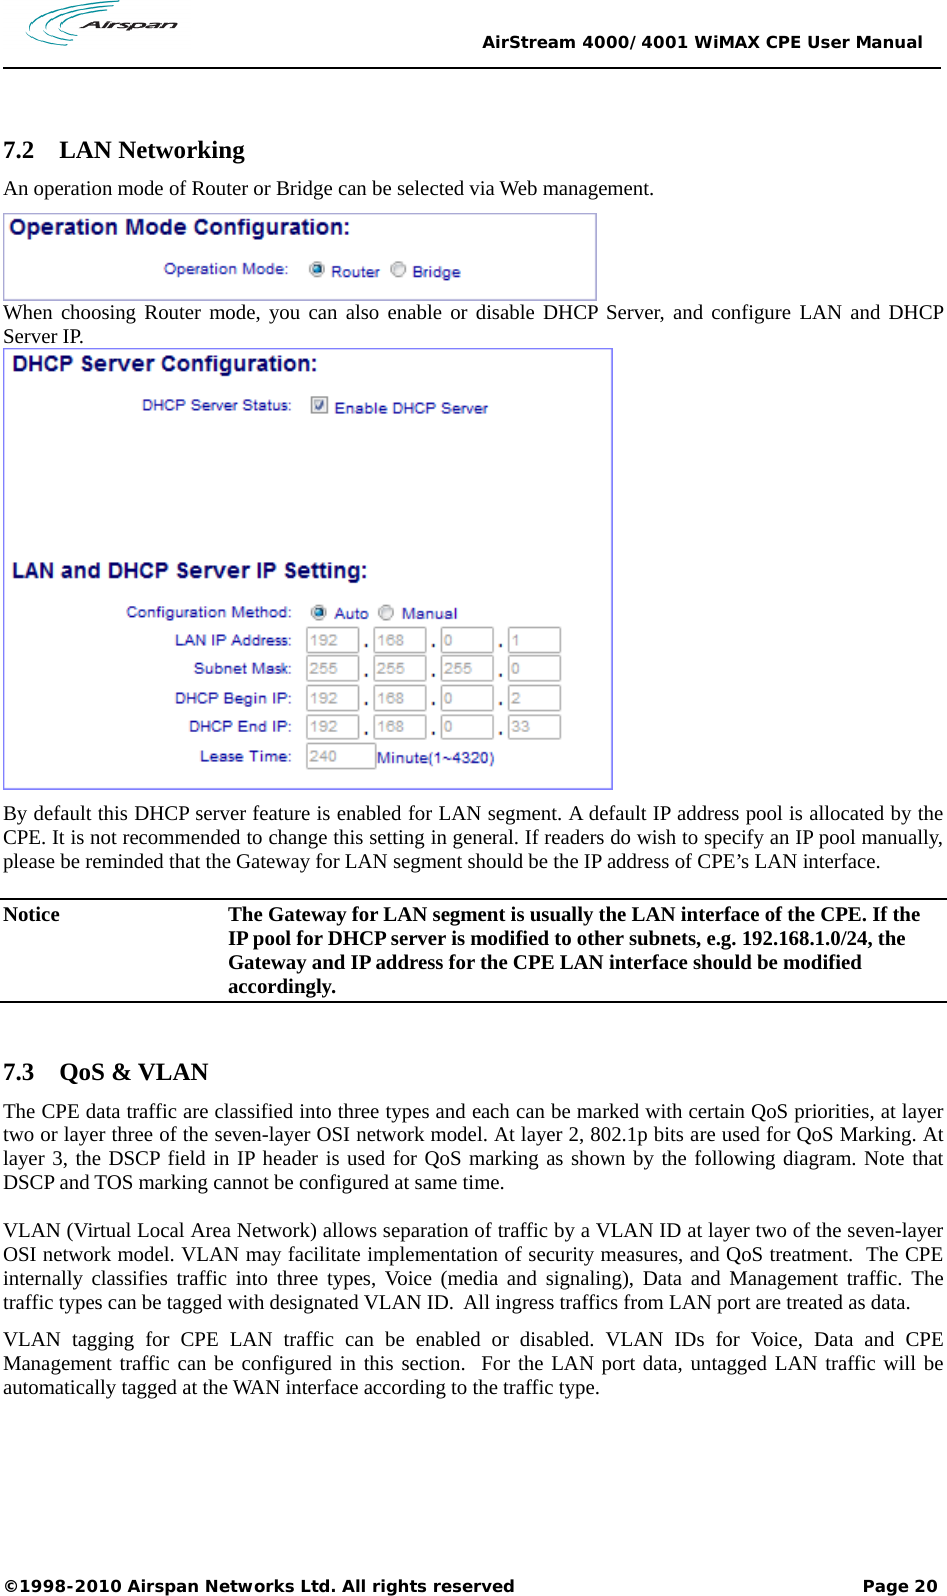                                                 AirStream 4000/4001 WiMAX CPE User Manual ©1998-2010 Airspan Networks Ltd. All rights reserved                                                             Page 20   7.2 LAN Networking An operation mode of Router or Bridge can be selected via Web management.  When choosing Router mode, you can also enable or disable DHCP Server, and configure LAN and DHCP Server IP.  By default this DHCP server feature is enabled for LAN segment. A default IP address pool is allocated by the CPE. It is not recommended to change this setting in general. If readers do wish to specify an IP pool manually, please be reminded that the Gateway for LAN segment should be the IP address of CPE’s LAN interface. Notice  The Gateway for LAN segment is usually the LAN interface of the CPE. If the IP pool for DHCP server is modified to other subnets, e.g. 192.168.1.0/24, the Gateway and IP address for the CPE LAN interface should be modified accordingly.    7.3 QoS &amp; VLAN The CPE data traffic are classified into three types and each can be marked with certain QoS priorities, at layer two or layer three of the seven-layer OSI network model. At layer 2, 802.1p bits are used for QoS Marking. At layer 3, the DSCP field in IP header is used for QoS marking as shown by the following diagram. Note that DSCP and TOS marking cannot be configured at same time.  VLAN (Virtual Local Area Network) allows separation of traffic by a VLAN ID at layer two of the seven-layer OSI network model. VLAN may facilitate implementation of security measures, and QoS treatment.  The CPE internally classifies traffic into three types, Voice (media and signaling), Data and Management traffic. The traffic types can be tagged with designated VLAN ID.  All ingress traffics from LAN port are treated as data.  VLAN tagging for CPE LAN traffic can be enabled or disabled. VLAN IDs for Voice, Data and CPE Management traffic can be configured in this section.  For the LAN port data, untagged LAN traffic will be automatically tagged at the WAN interface according to the traffic type.   